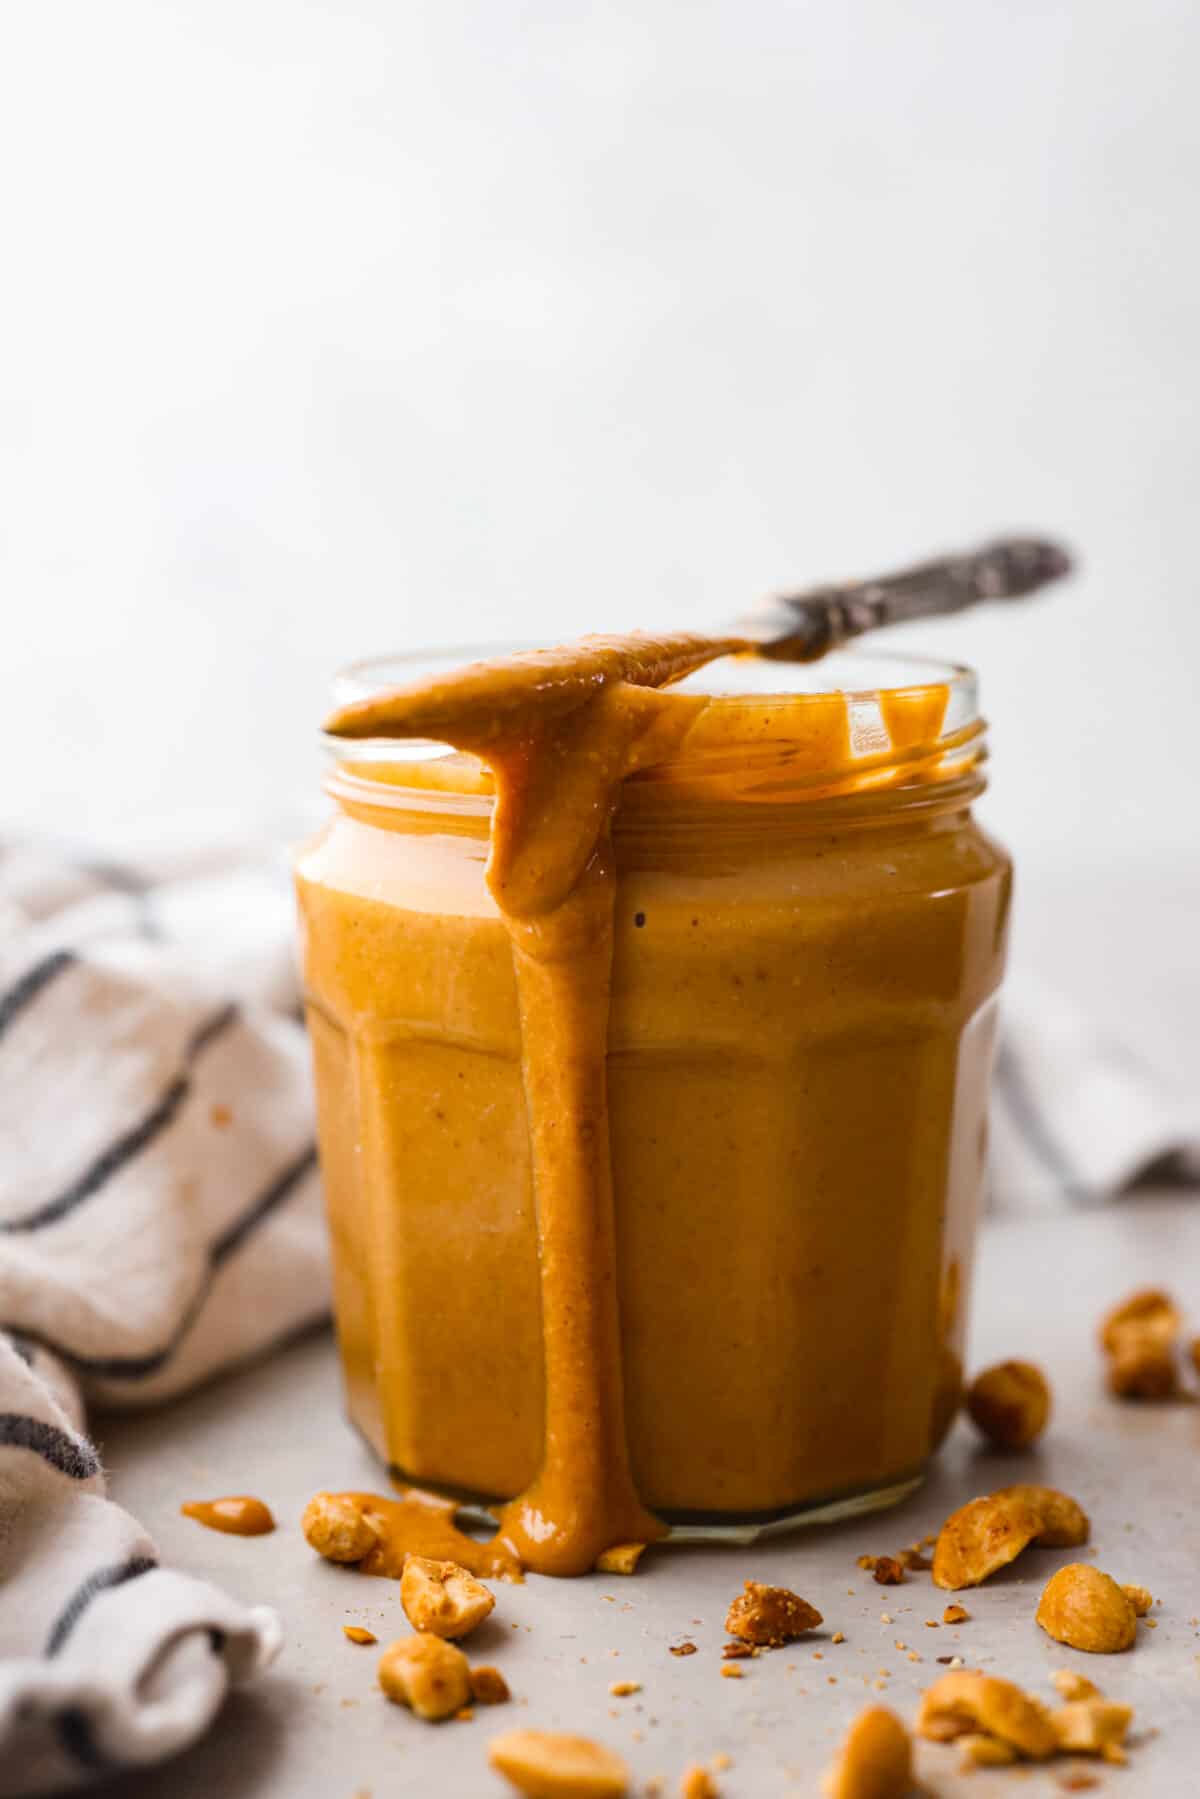 A glass jar filled with peanut butter, topped with a metal butter knife that also has peanut butter on it.